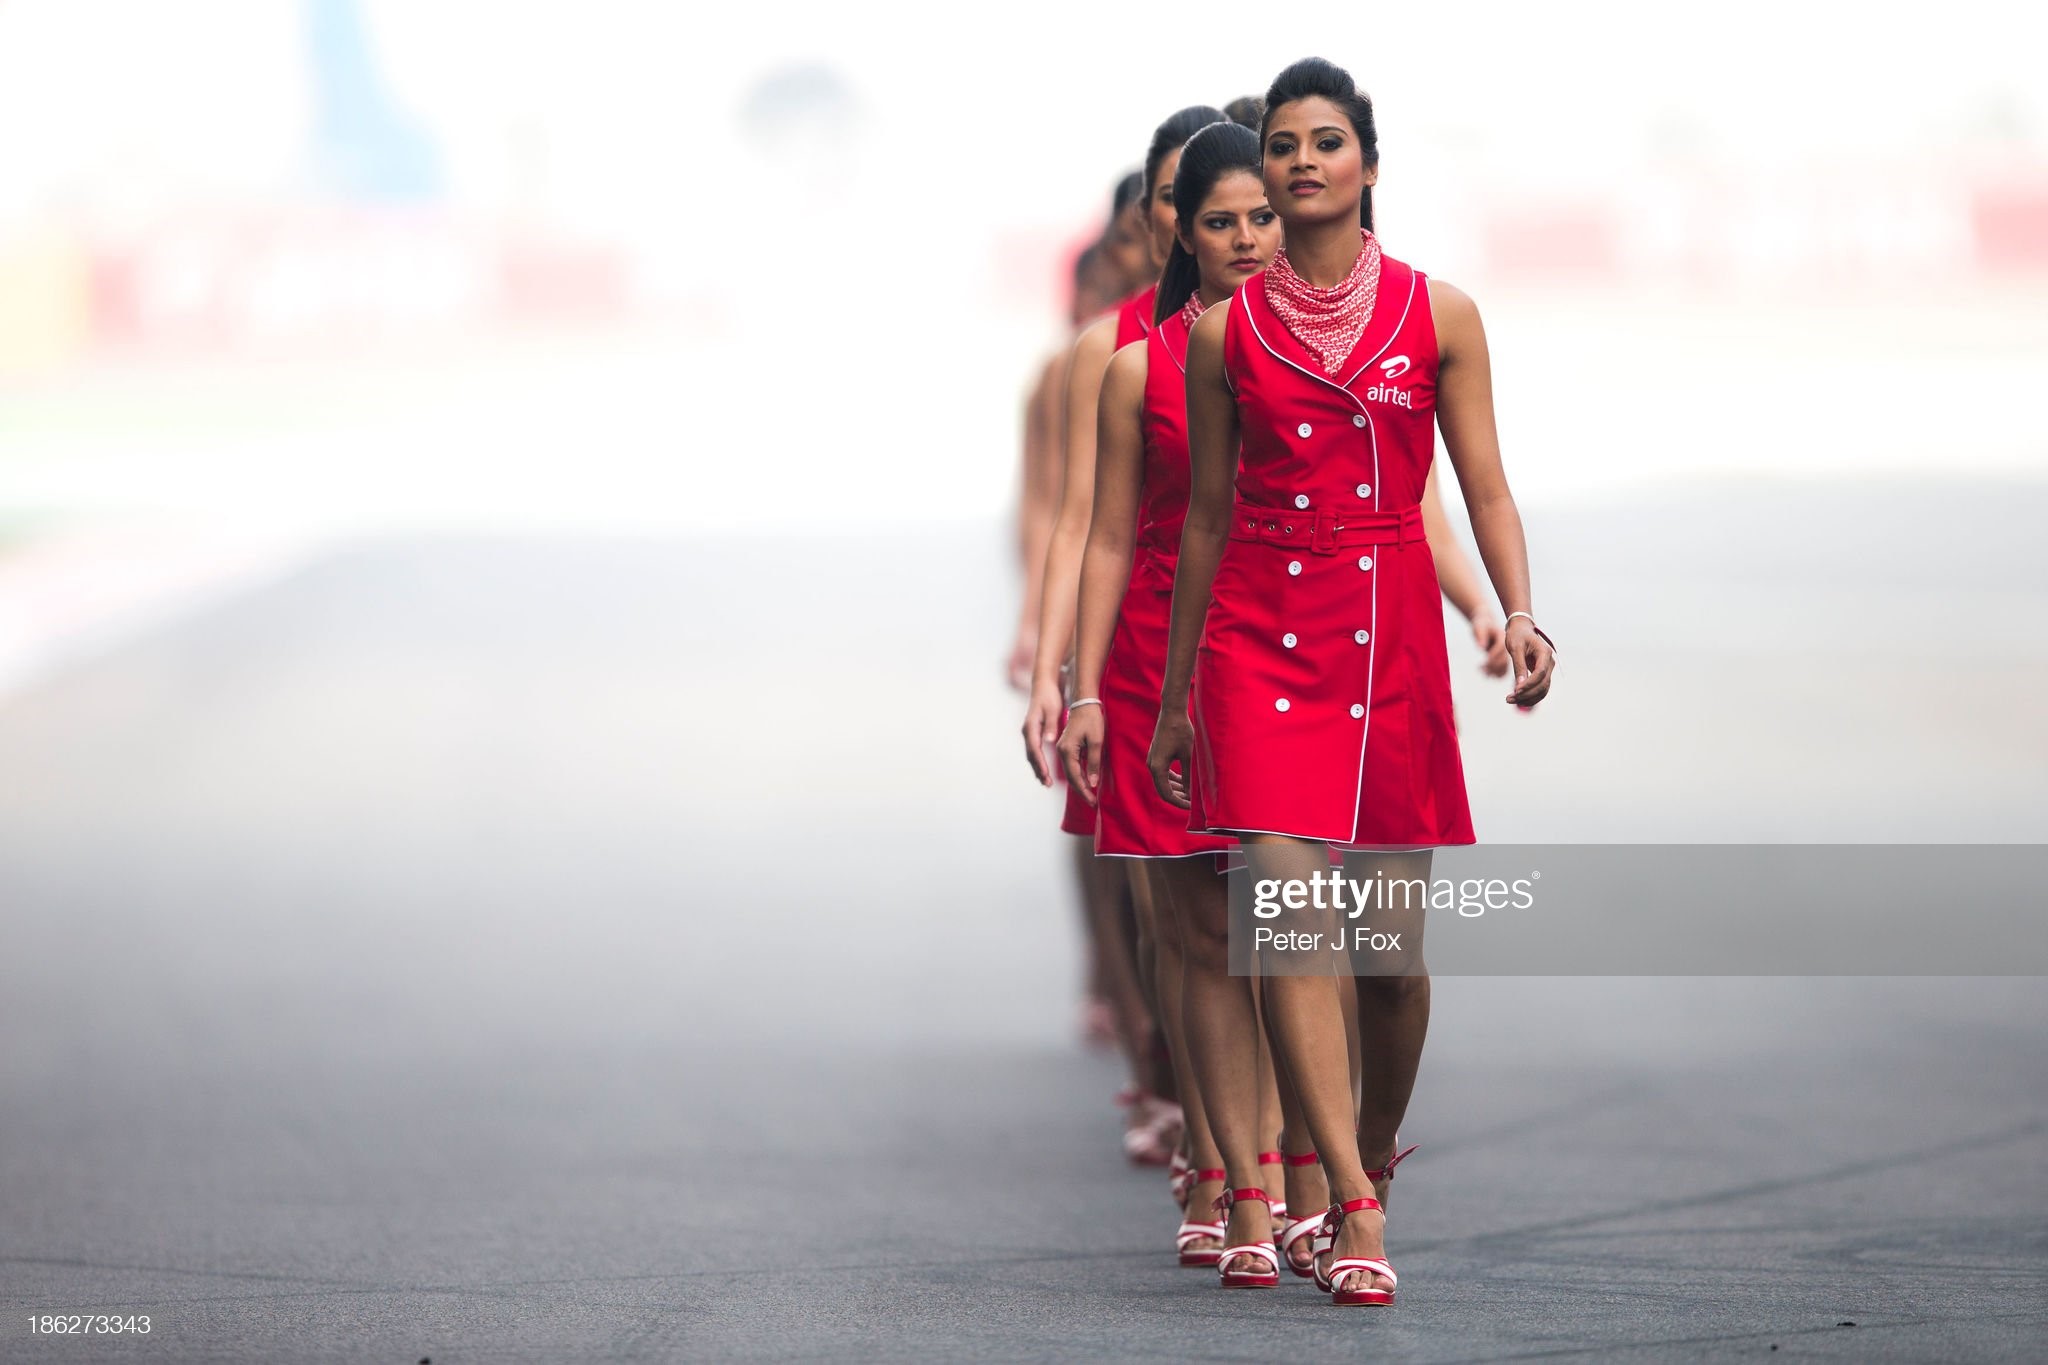 Grid girls walk on the tarmac during the Indian Formula One Grand Prix at Buddh International Circuit on October 27, 2013 in Noida, India. 